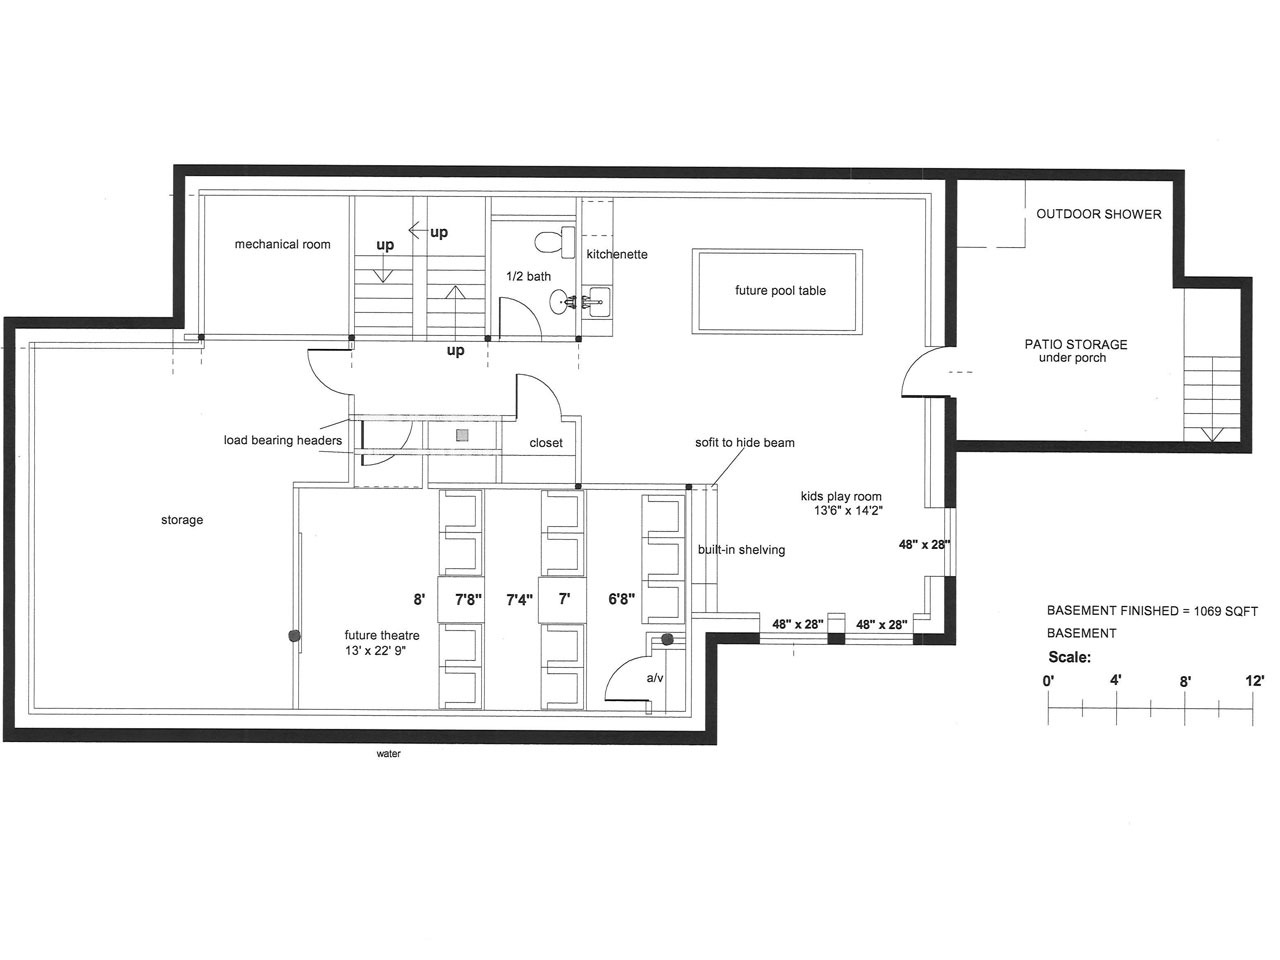 Floor Plans and House Design